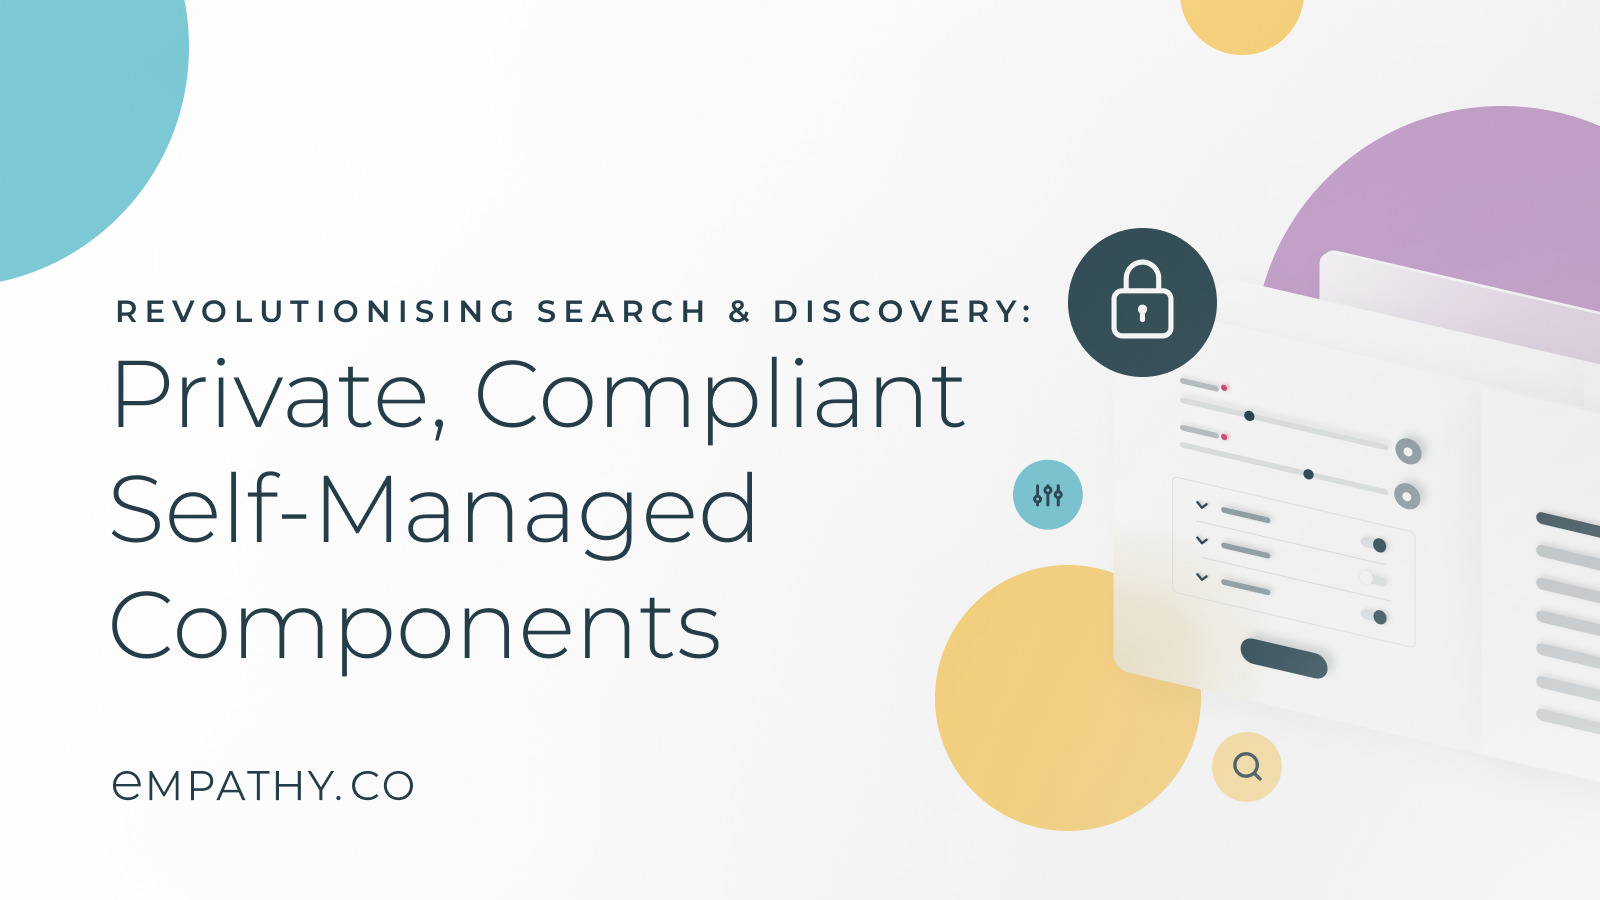 Revolutionizing search and discovery: private, compliant Self-managed Components